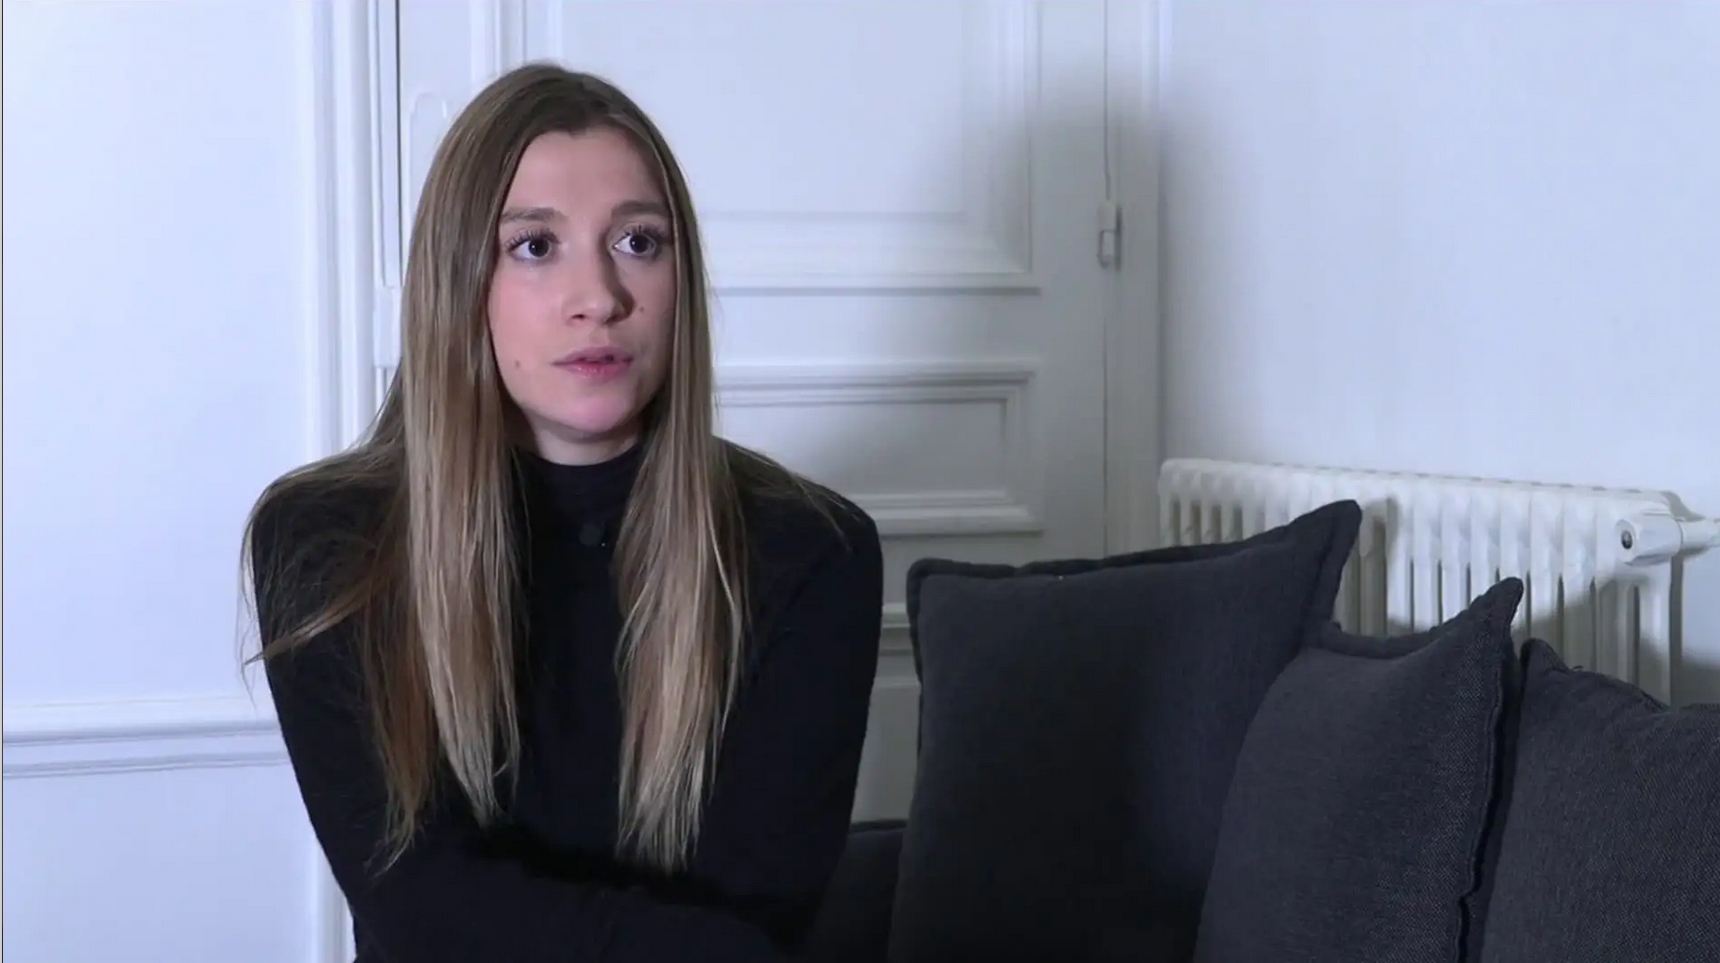 'If we applied the laws, I wouldn't have been raped' – Young French woman speaks out after illegal African migrant rapes her in Paris building lobby